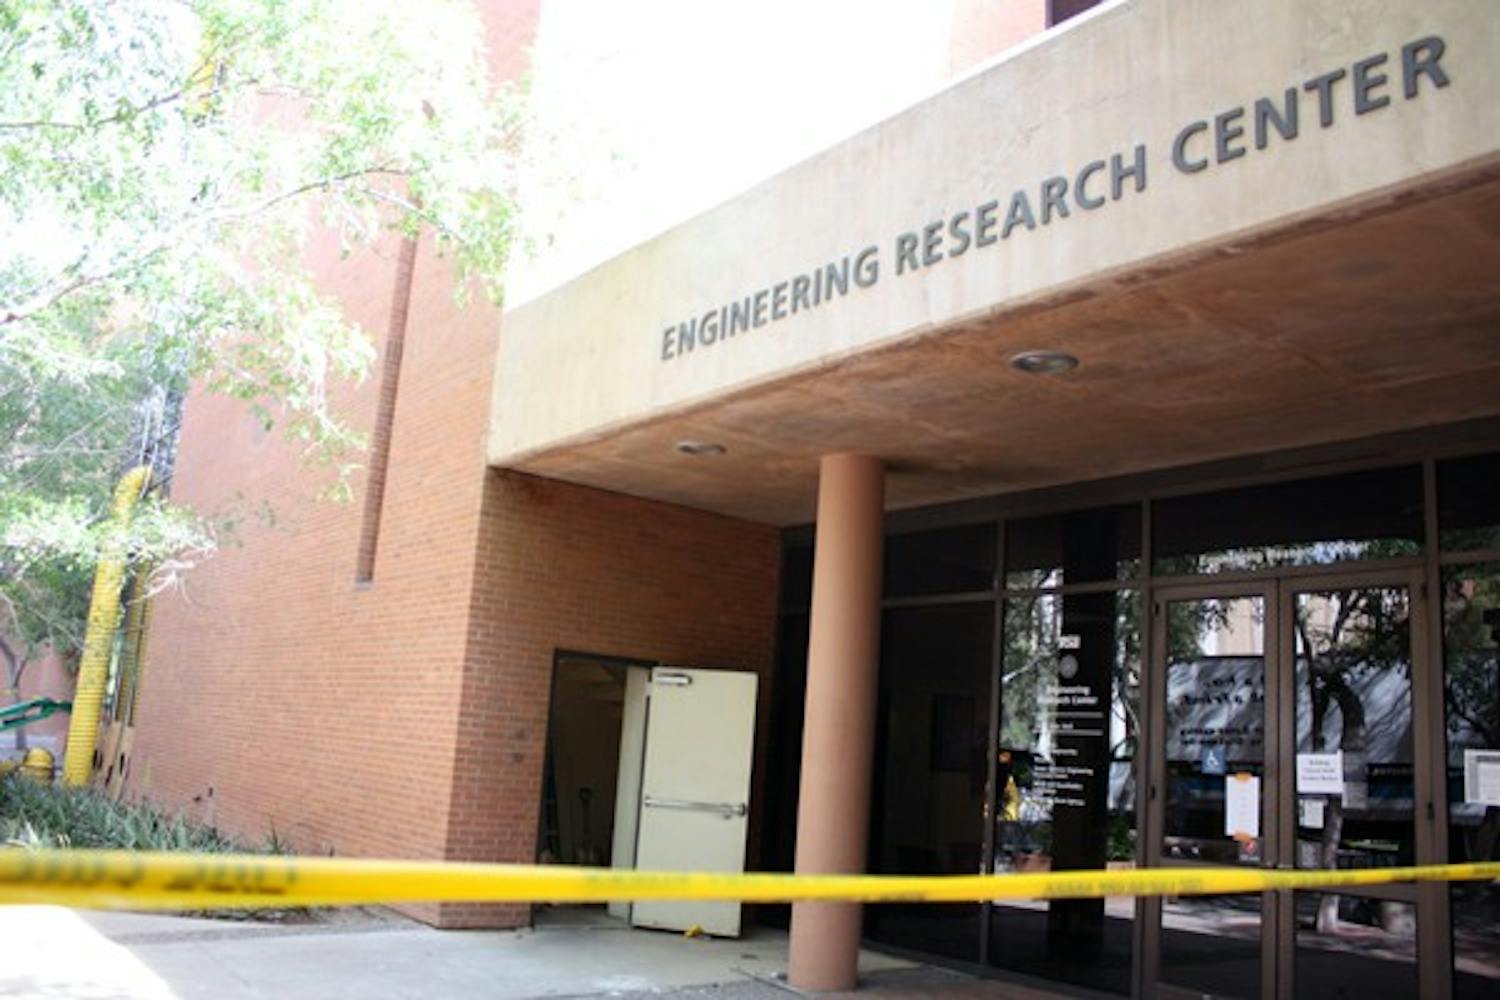 Areas of the four damaged floors in the Engineering Research Center will begin opening as early as Thursday after a small fire occurred on the fourth floor Tuesday morning. (Photo by Shawn Raymundo)